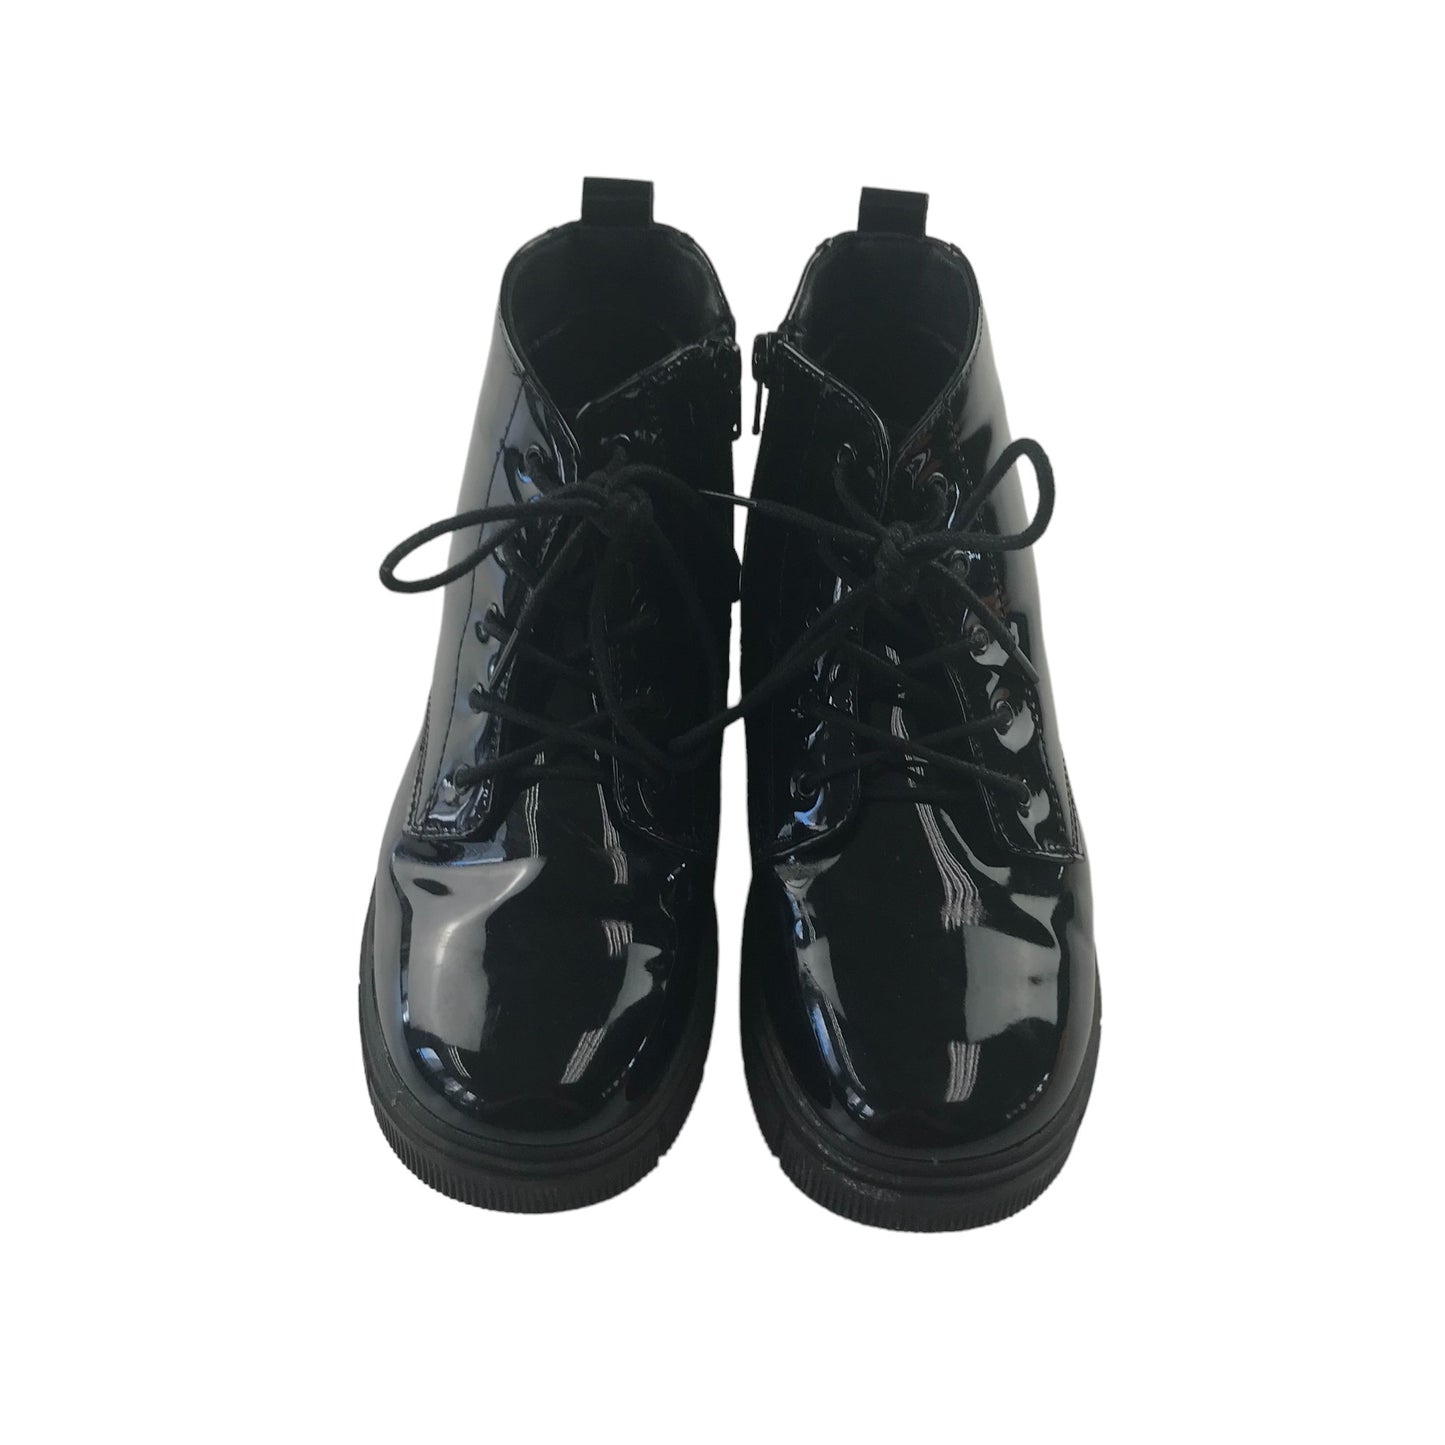 Schuh Boots Shoe Size 2 Black Glossy Hight Tops with Laces and Zipper